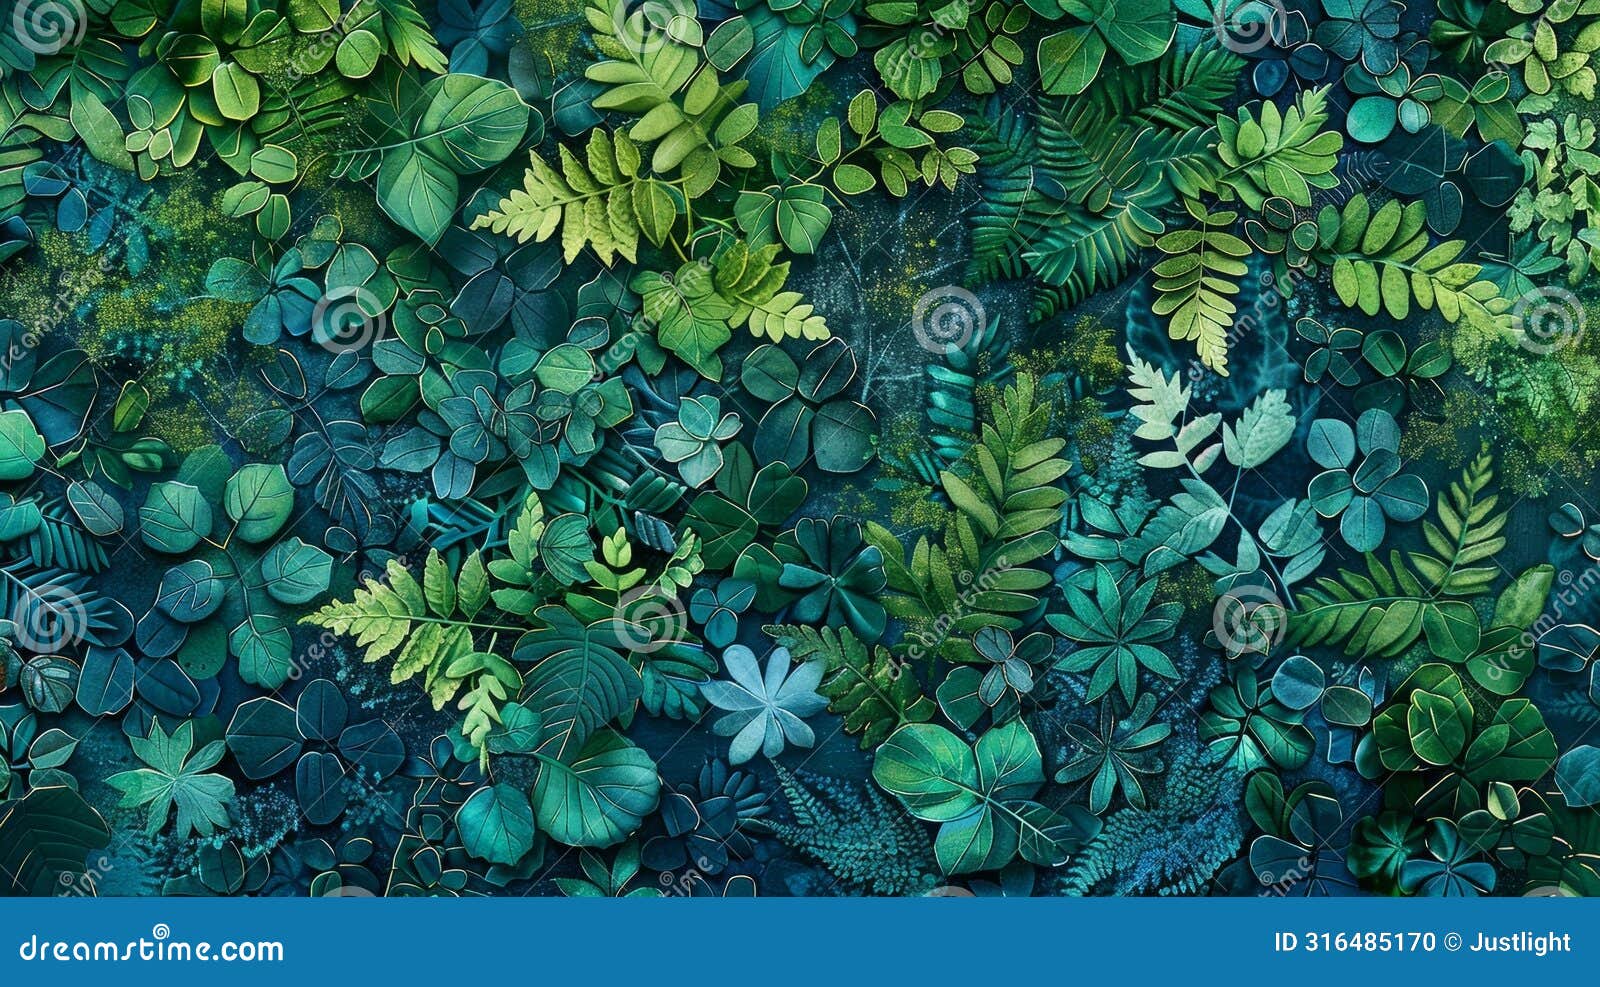 a mosaiclike pattern featuring small layered s representing the density and intricacy of the layers in a rainforest